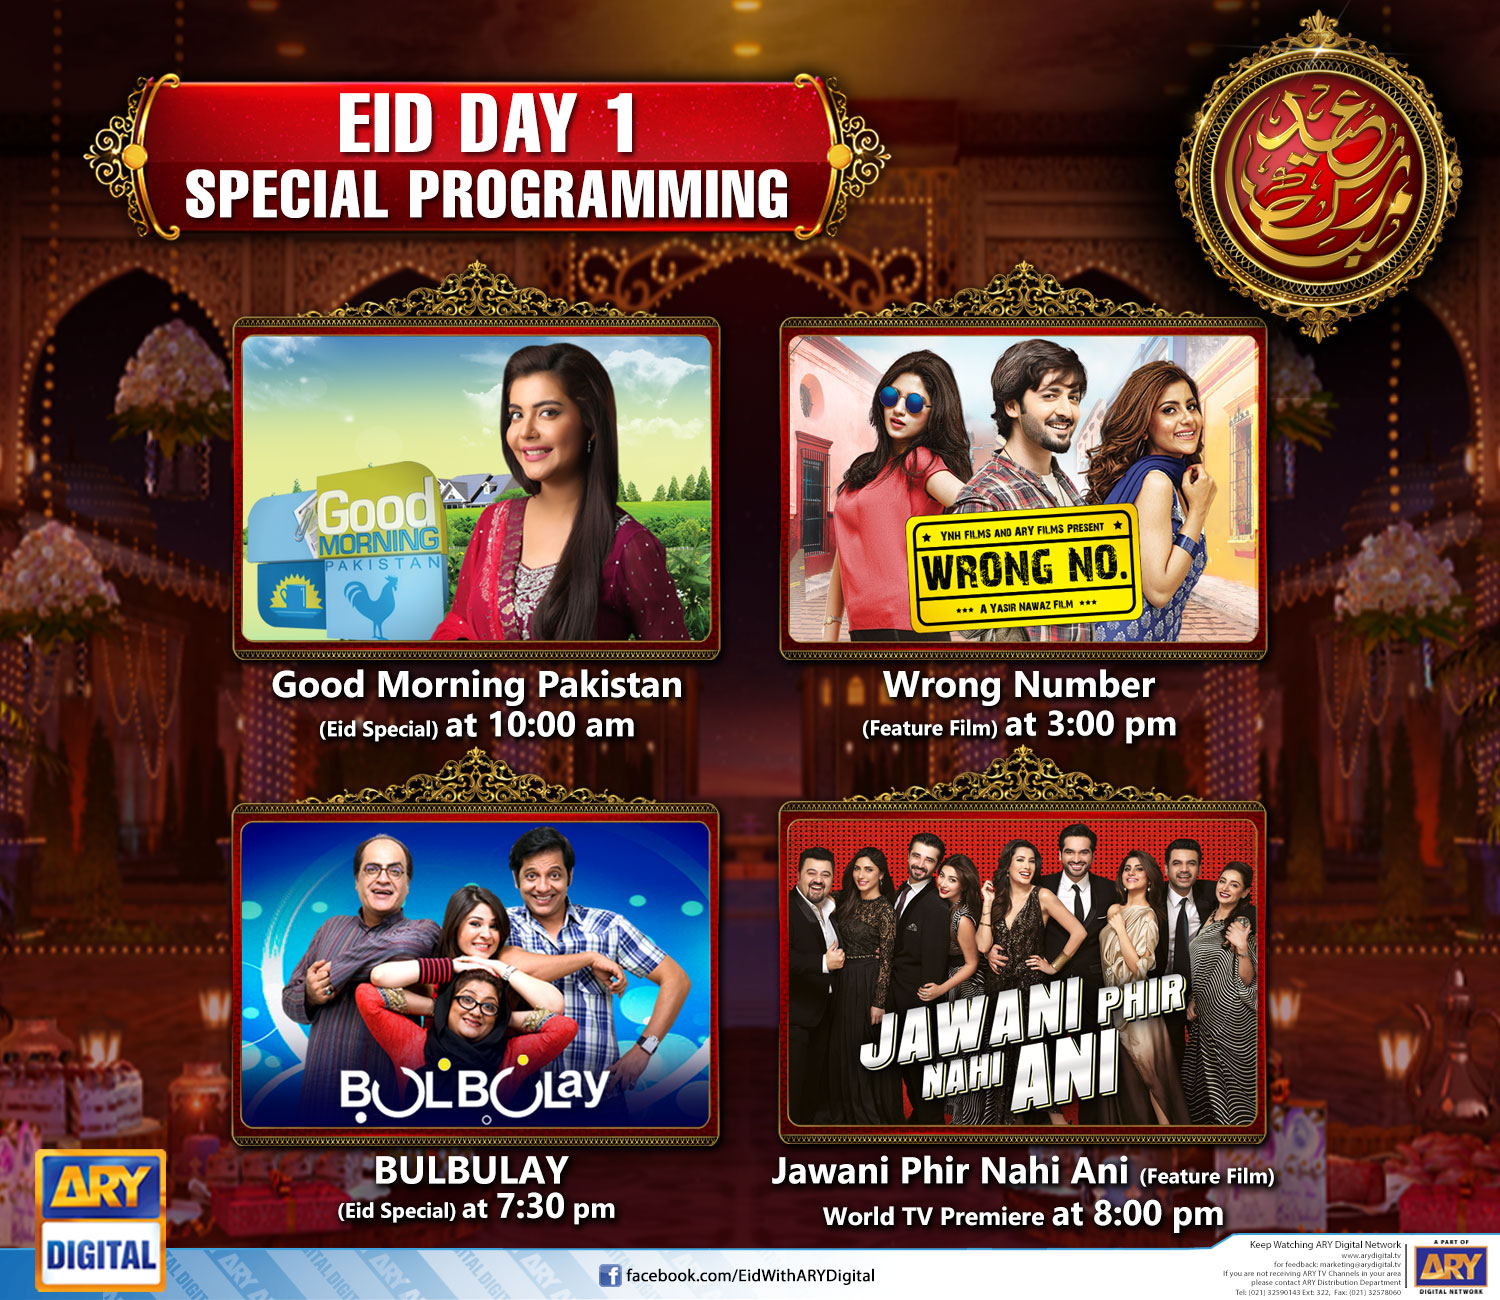 [Press Release] ARY Digital and ARY Zindagi brings exciting programs for Eid 2016 (1)